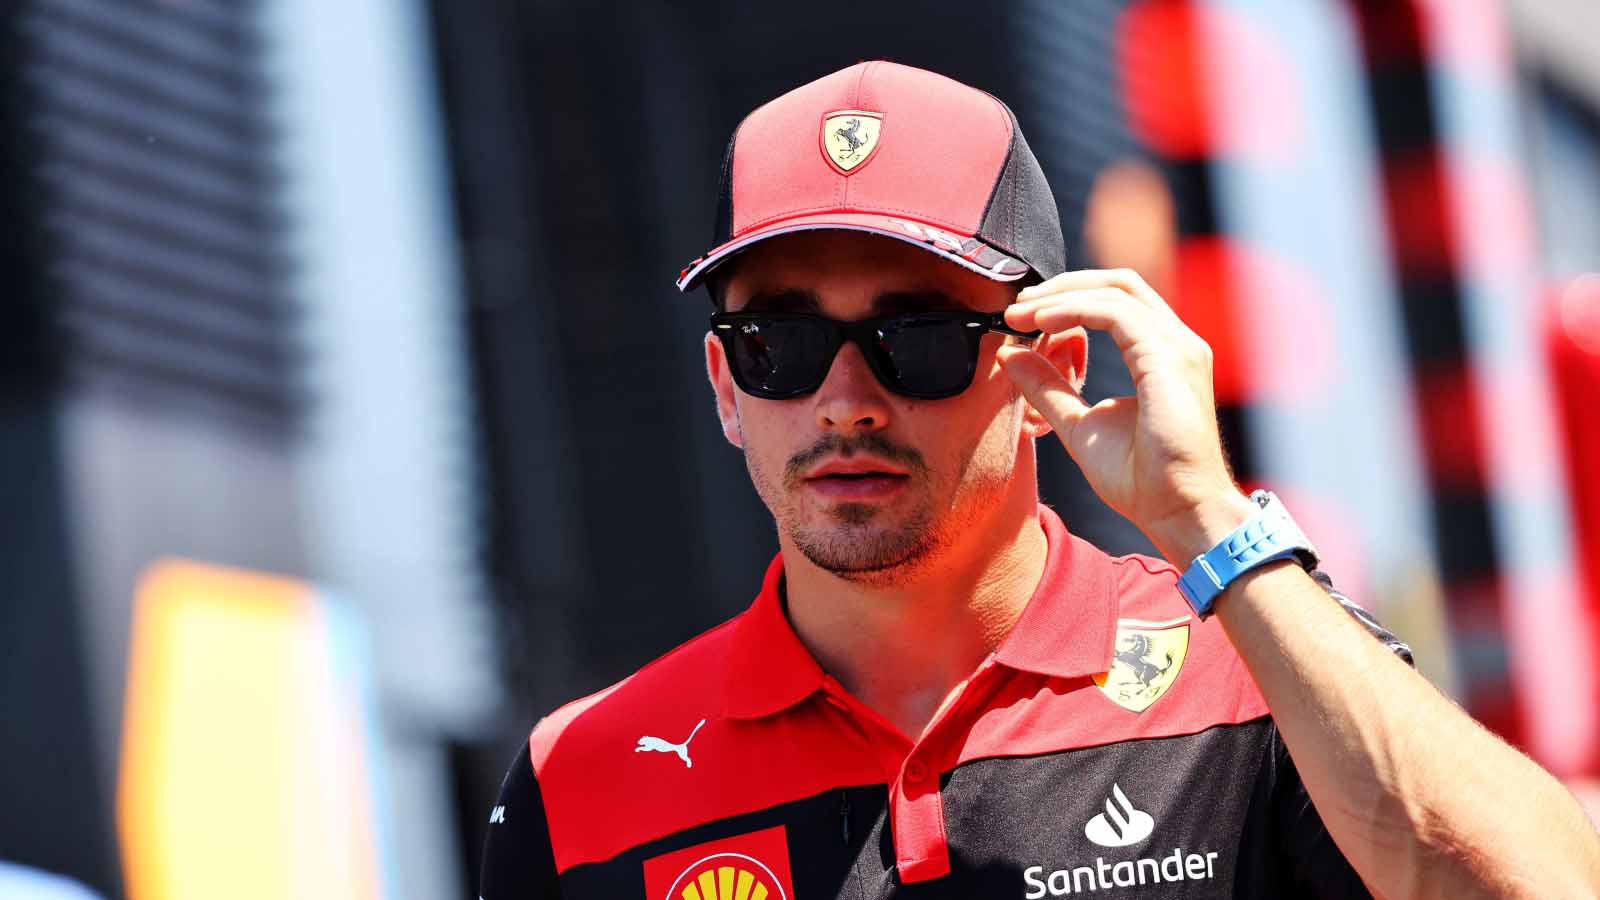 Charles Leclerc wears sunglasses in the paddock. France July 2022.